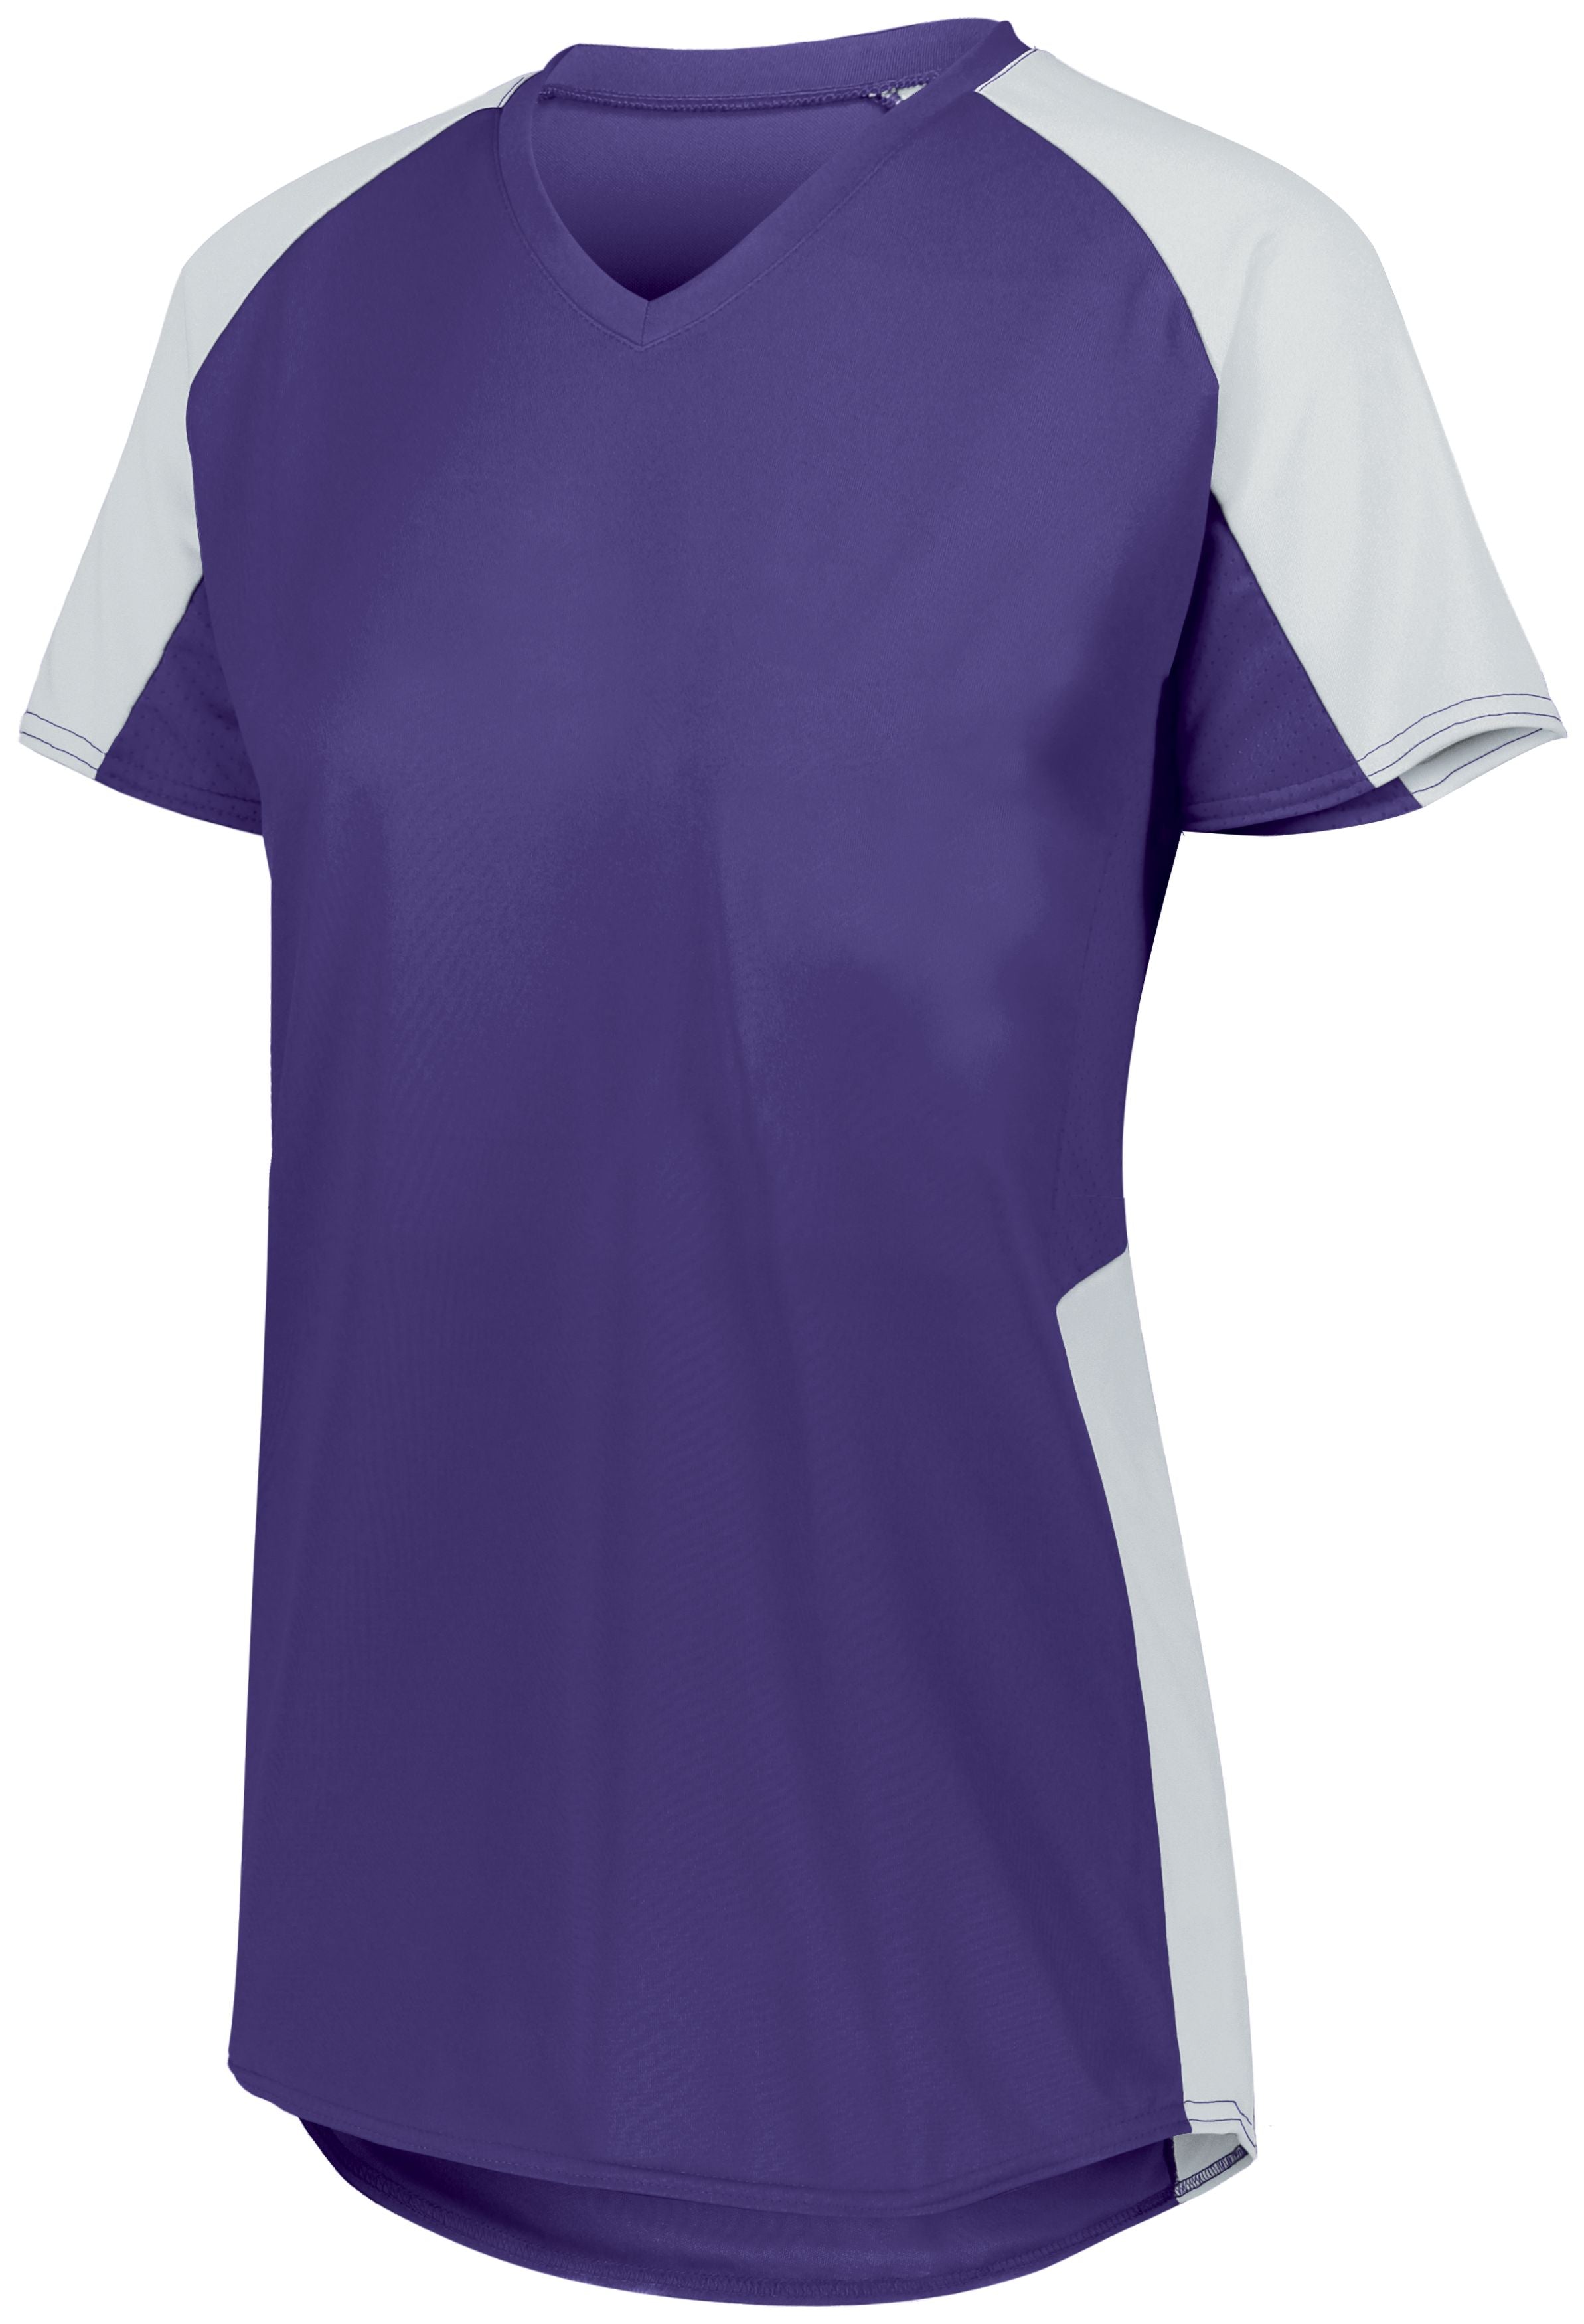 Augusta Sportswear Ladies Cutter Jersey in Purple/White  -Part of the Ladies, Ladies-Jersey, Augusta-Products, Softball, Shirts product lines at KanaleyCreations.com